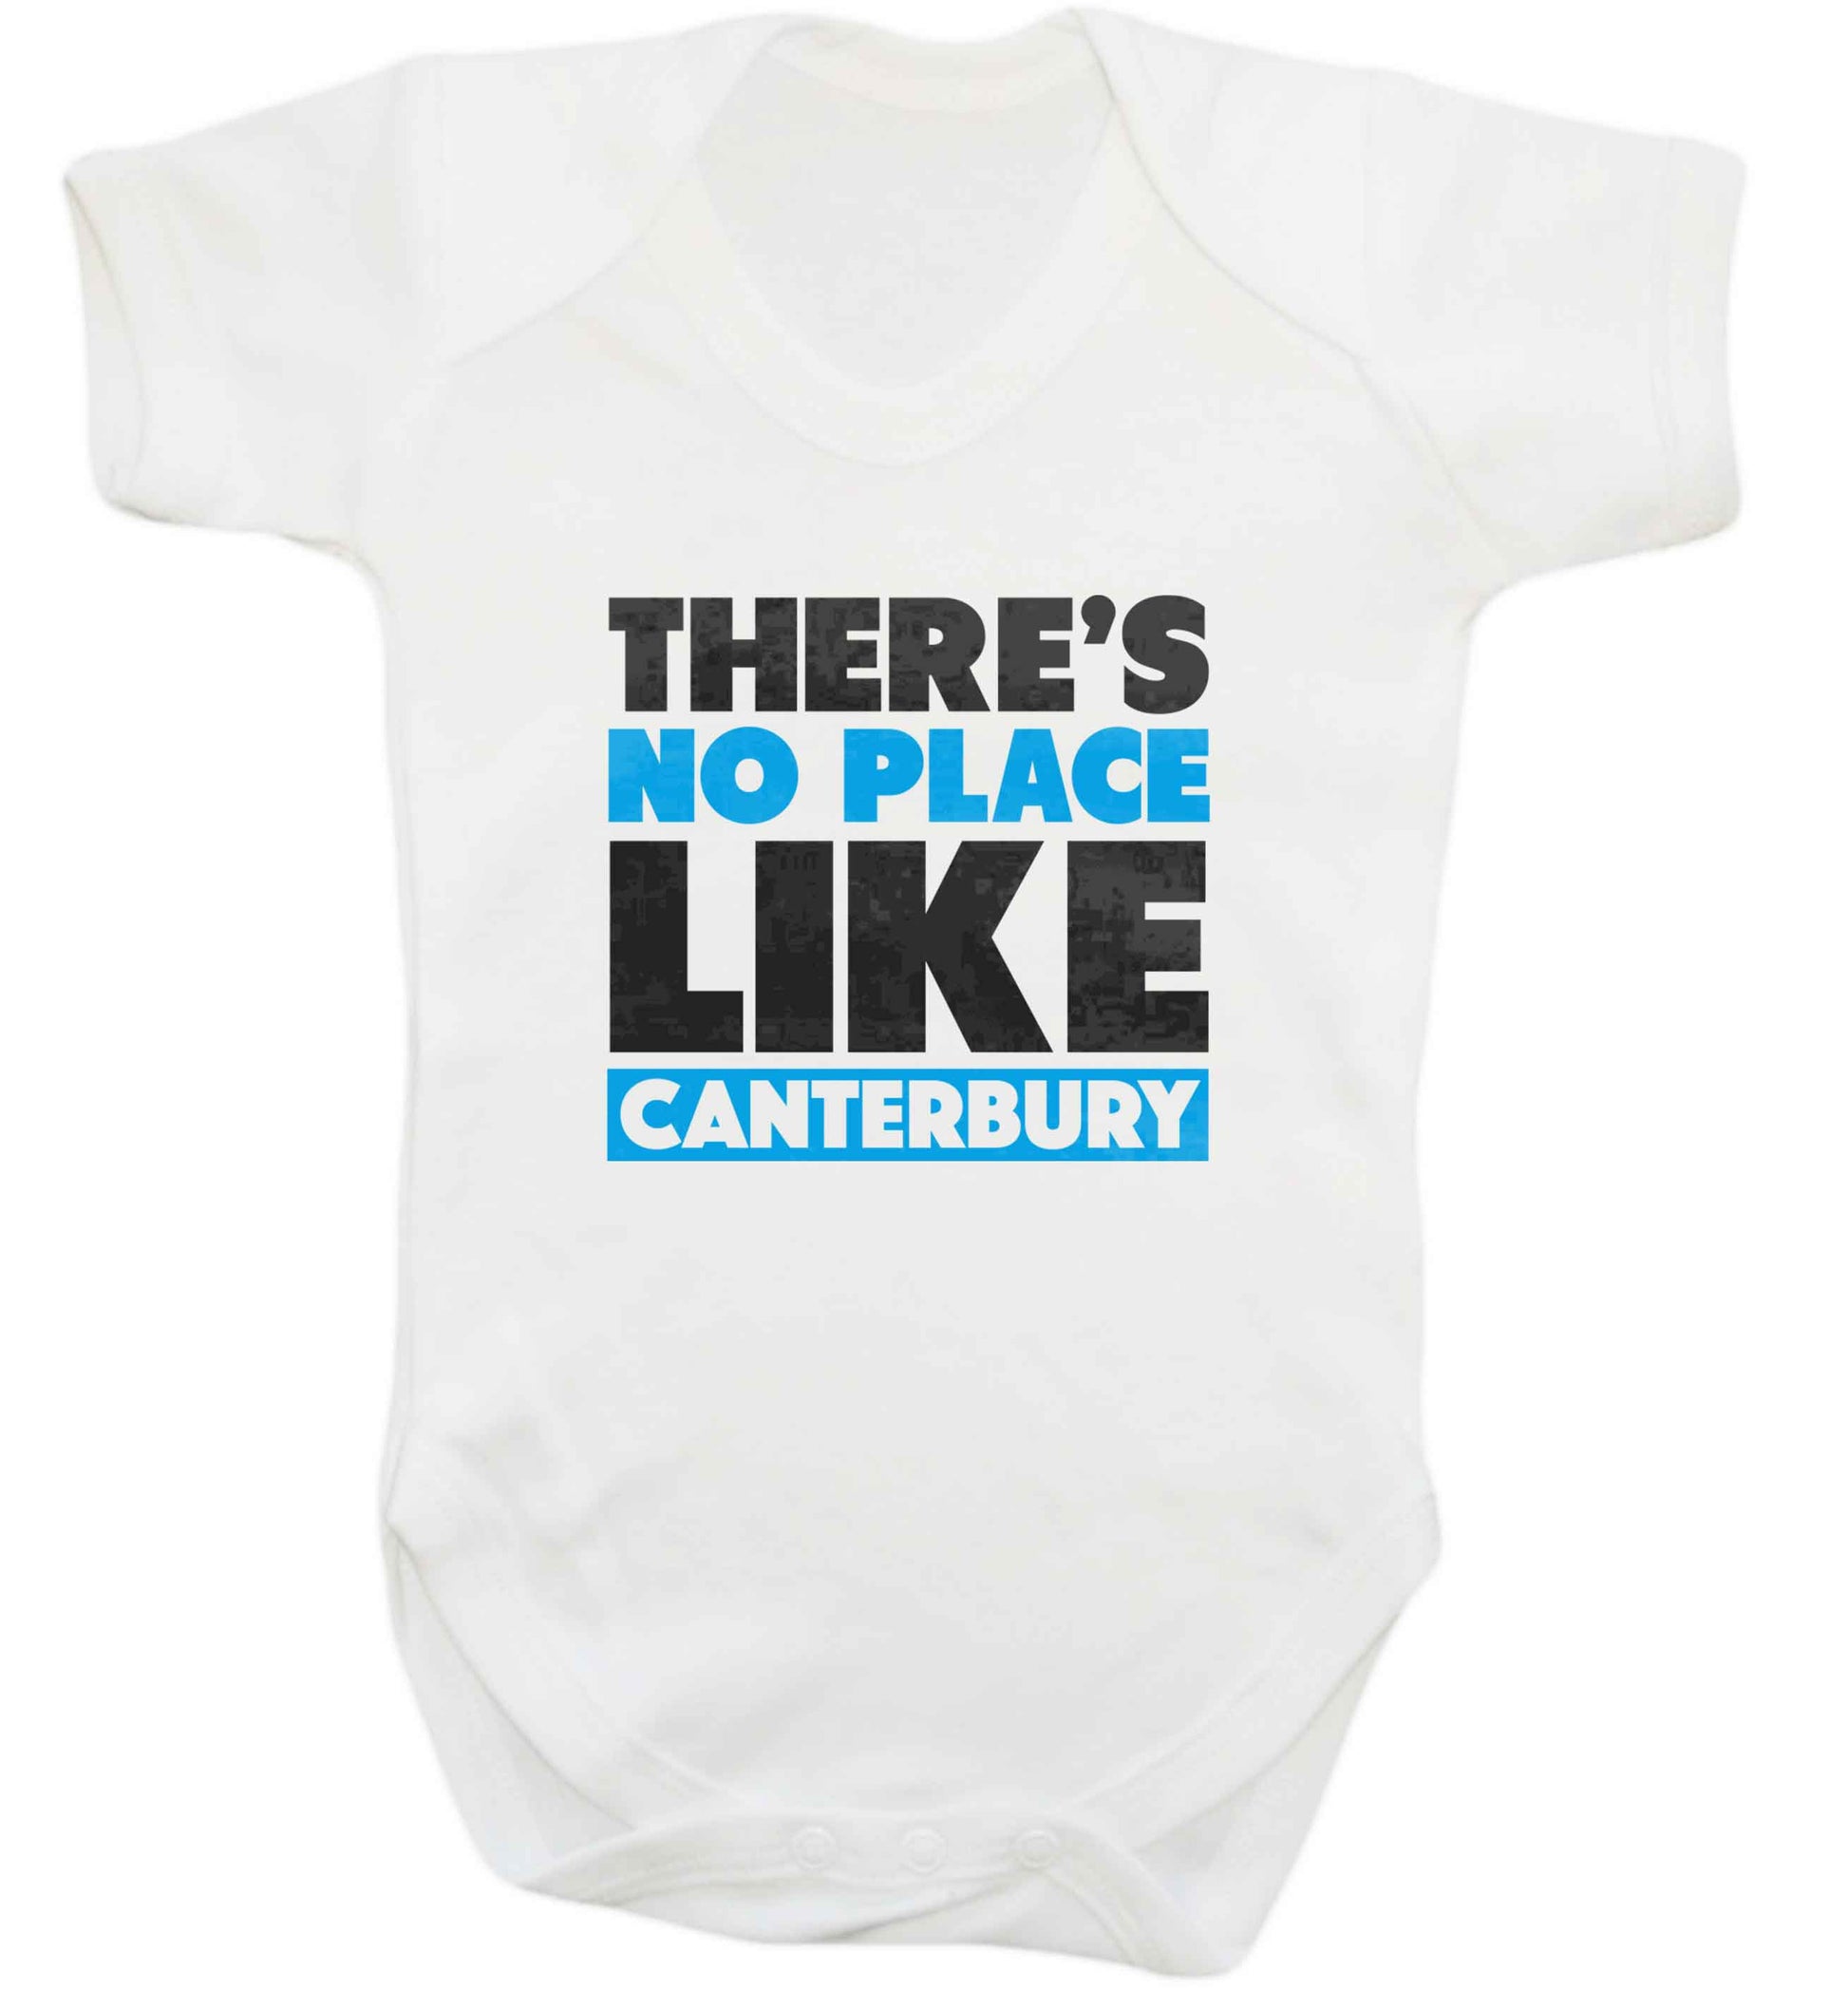 There's no place like Canterbury baby vest white 18-24 months